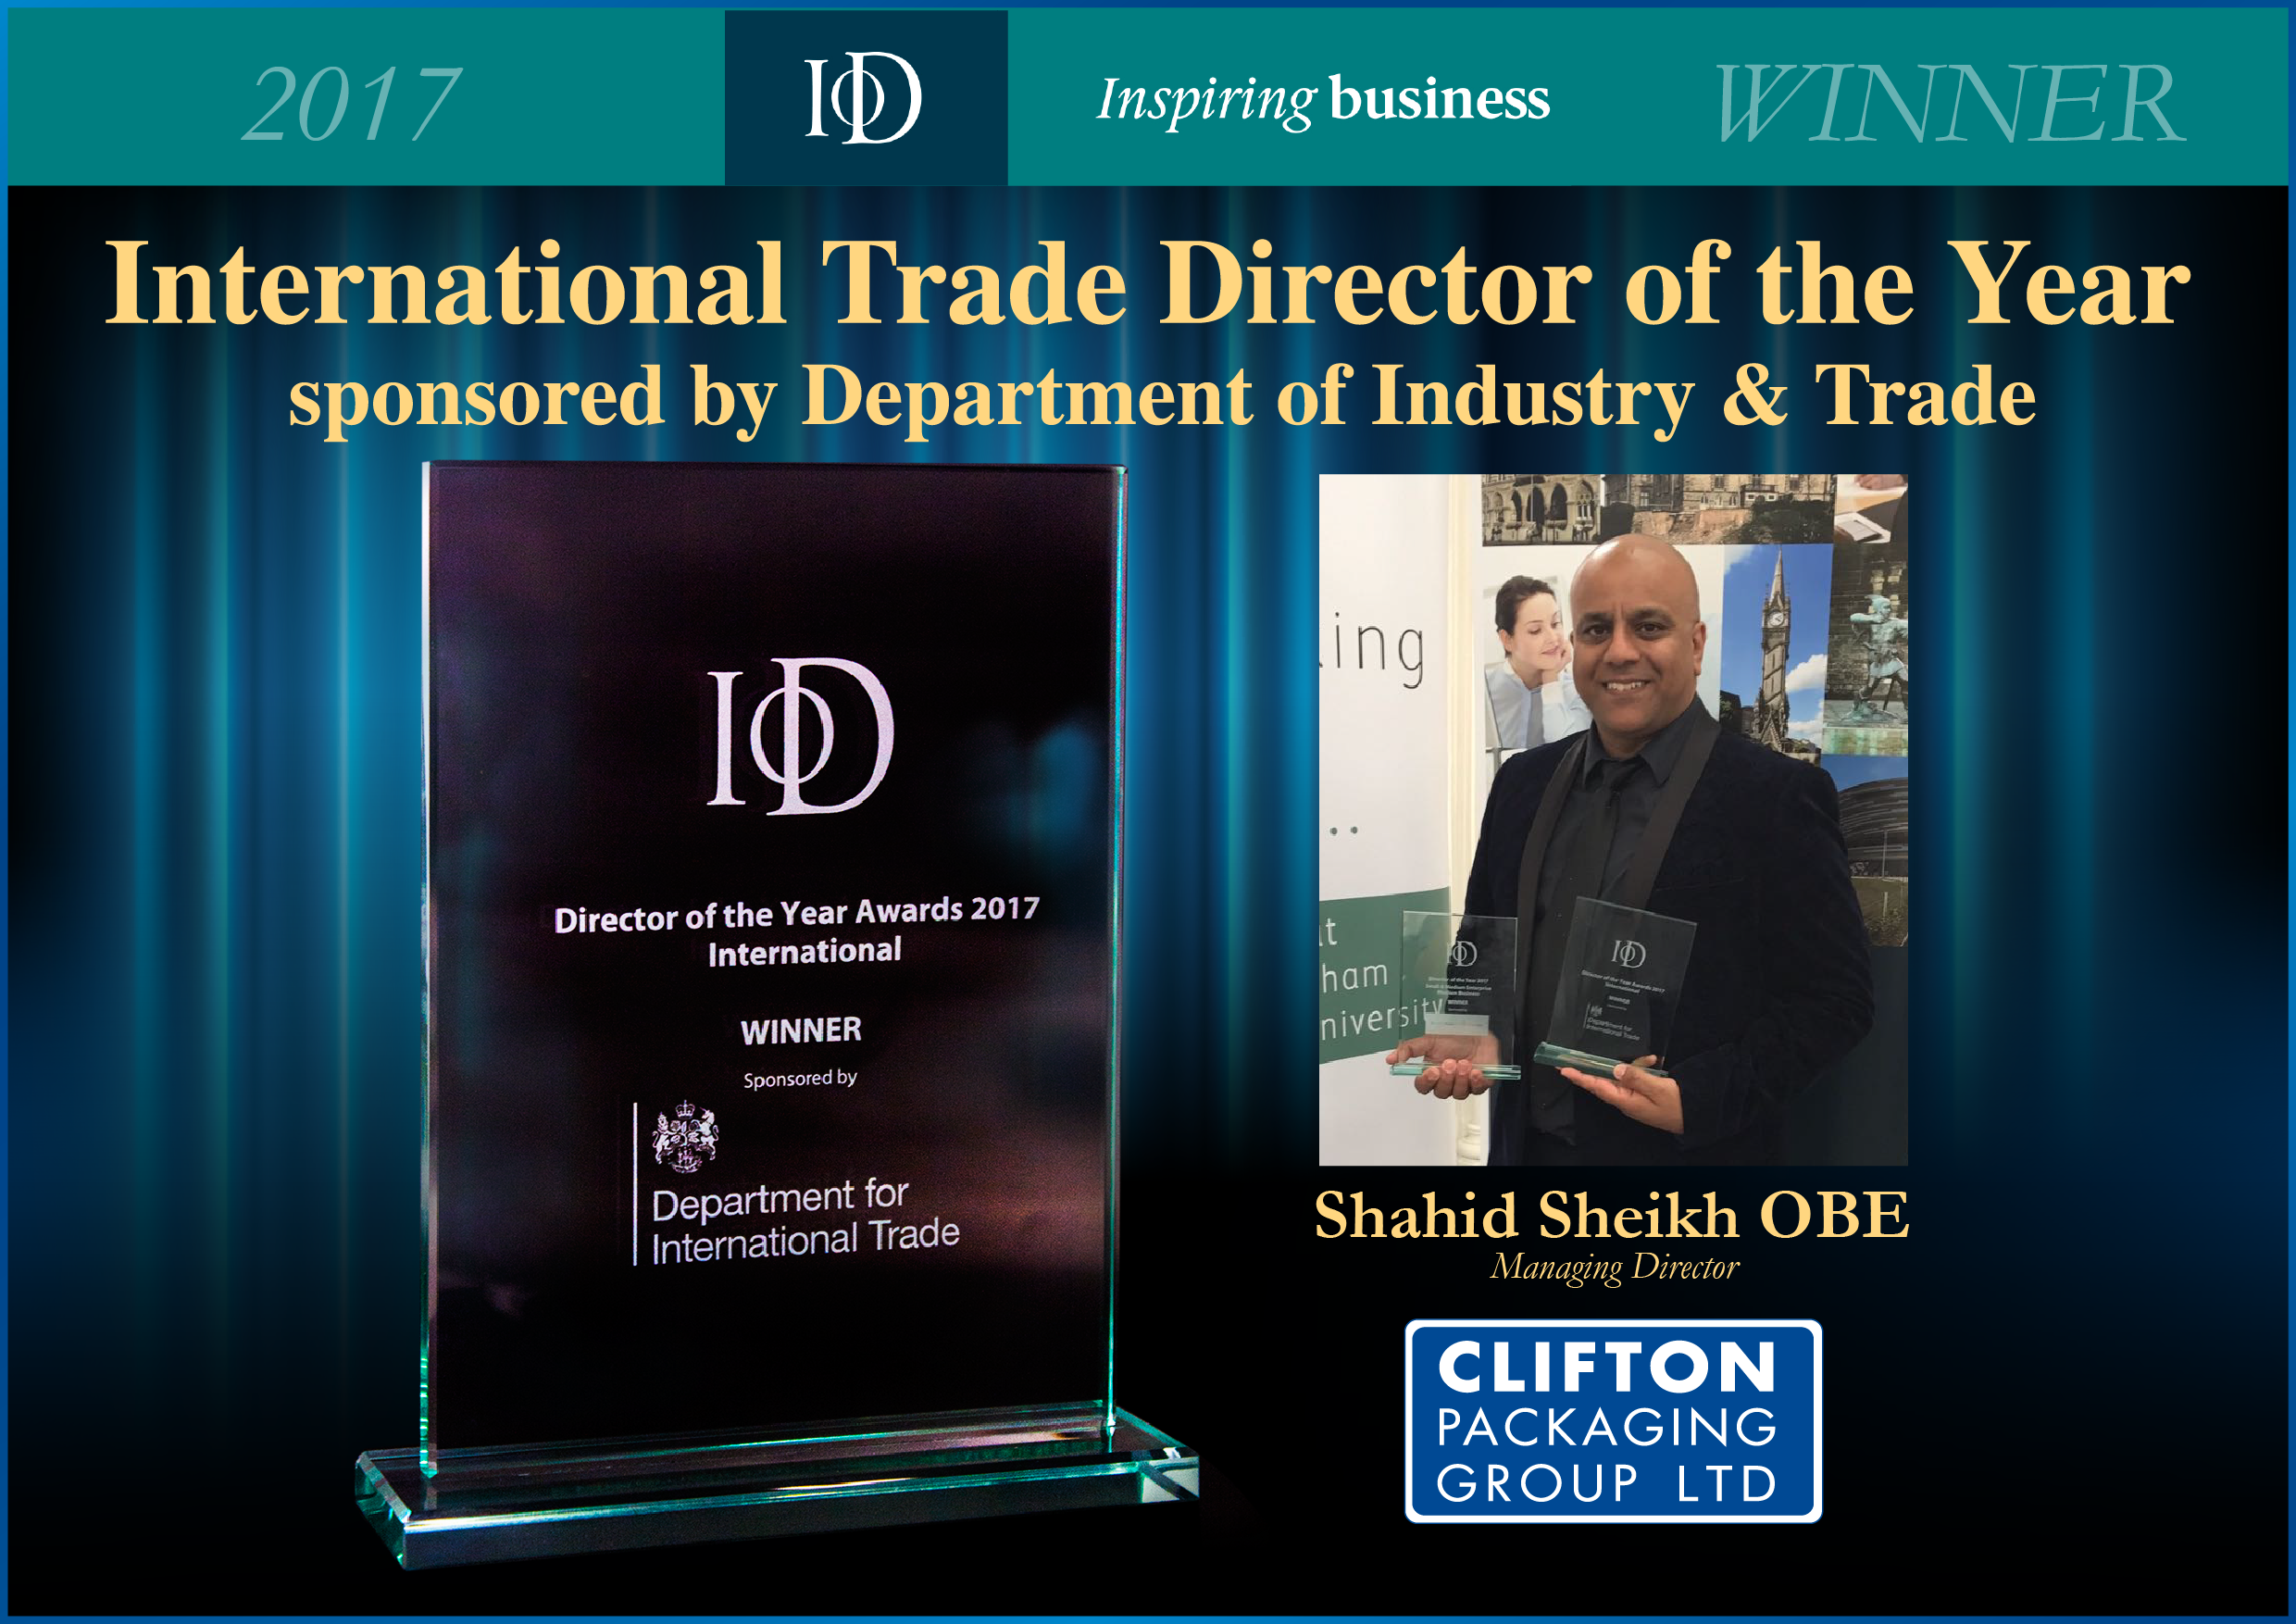 International Trade Director of the Year 2017, Clifton Packaging Group ltd. Packaging, Flexible Packaging